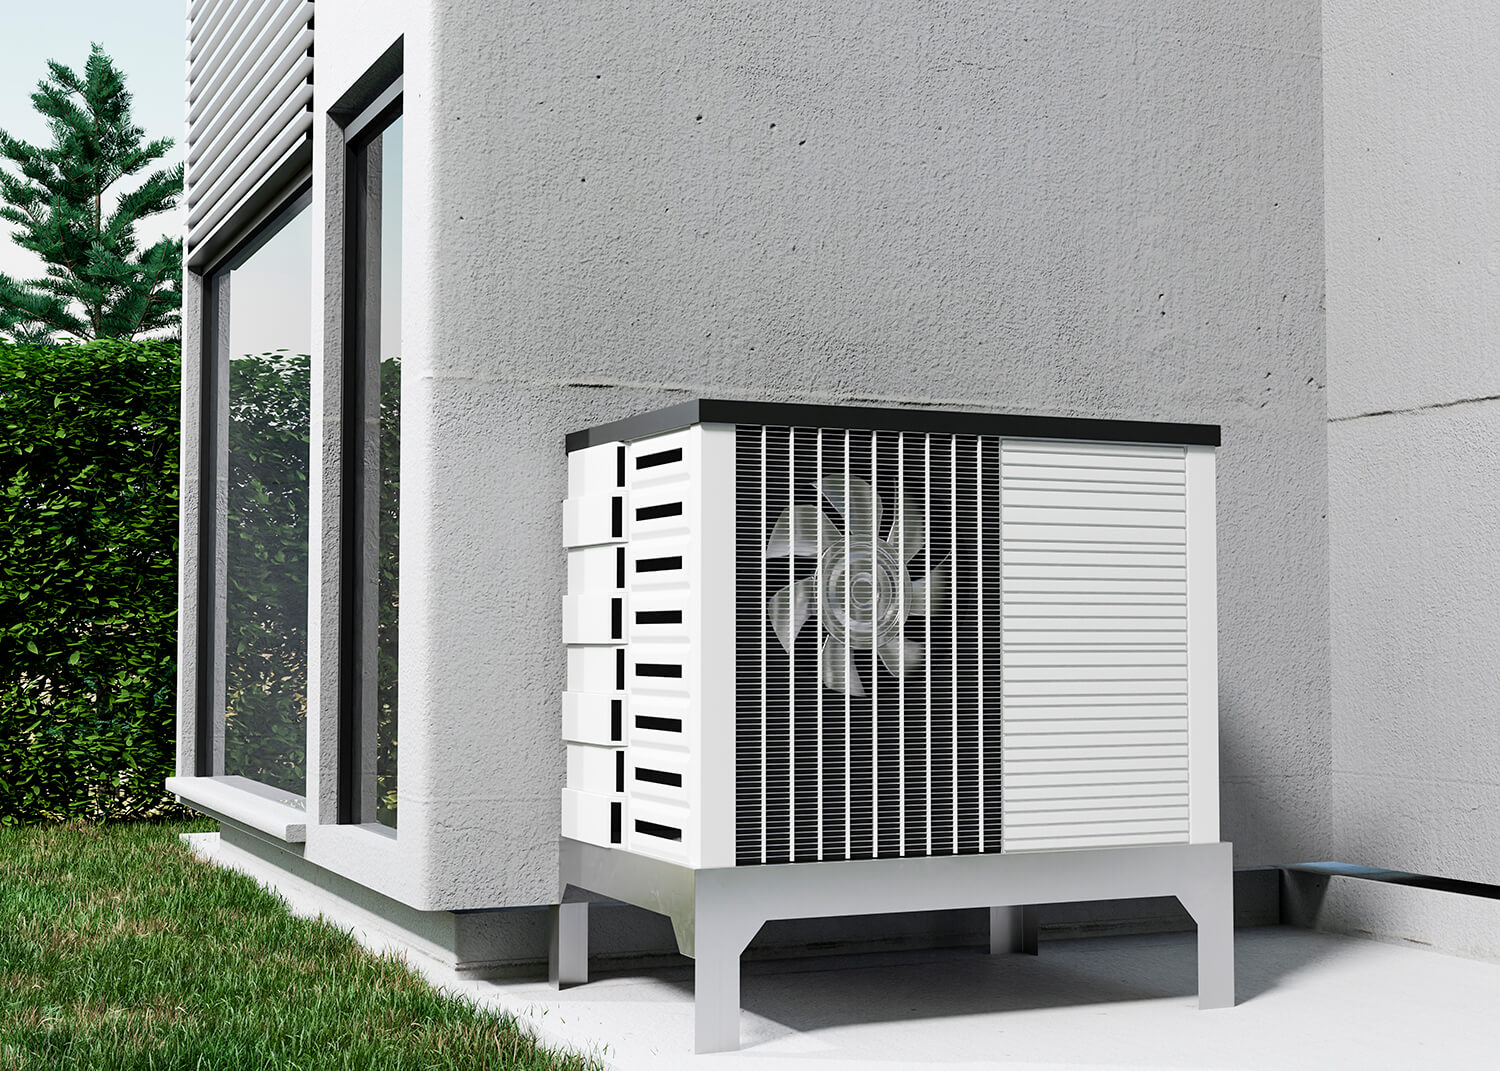 Heating, Ventilation as well as A/C system makes residing near the airport tolerable